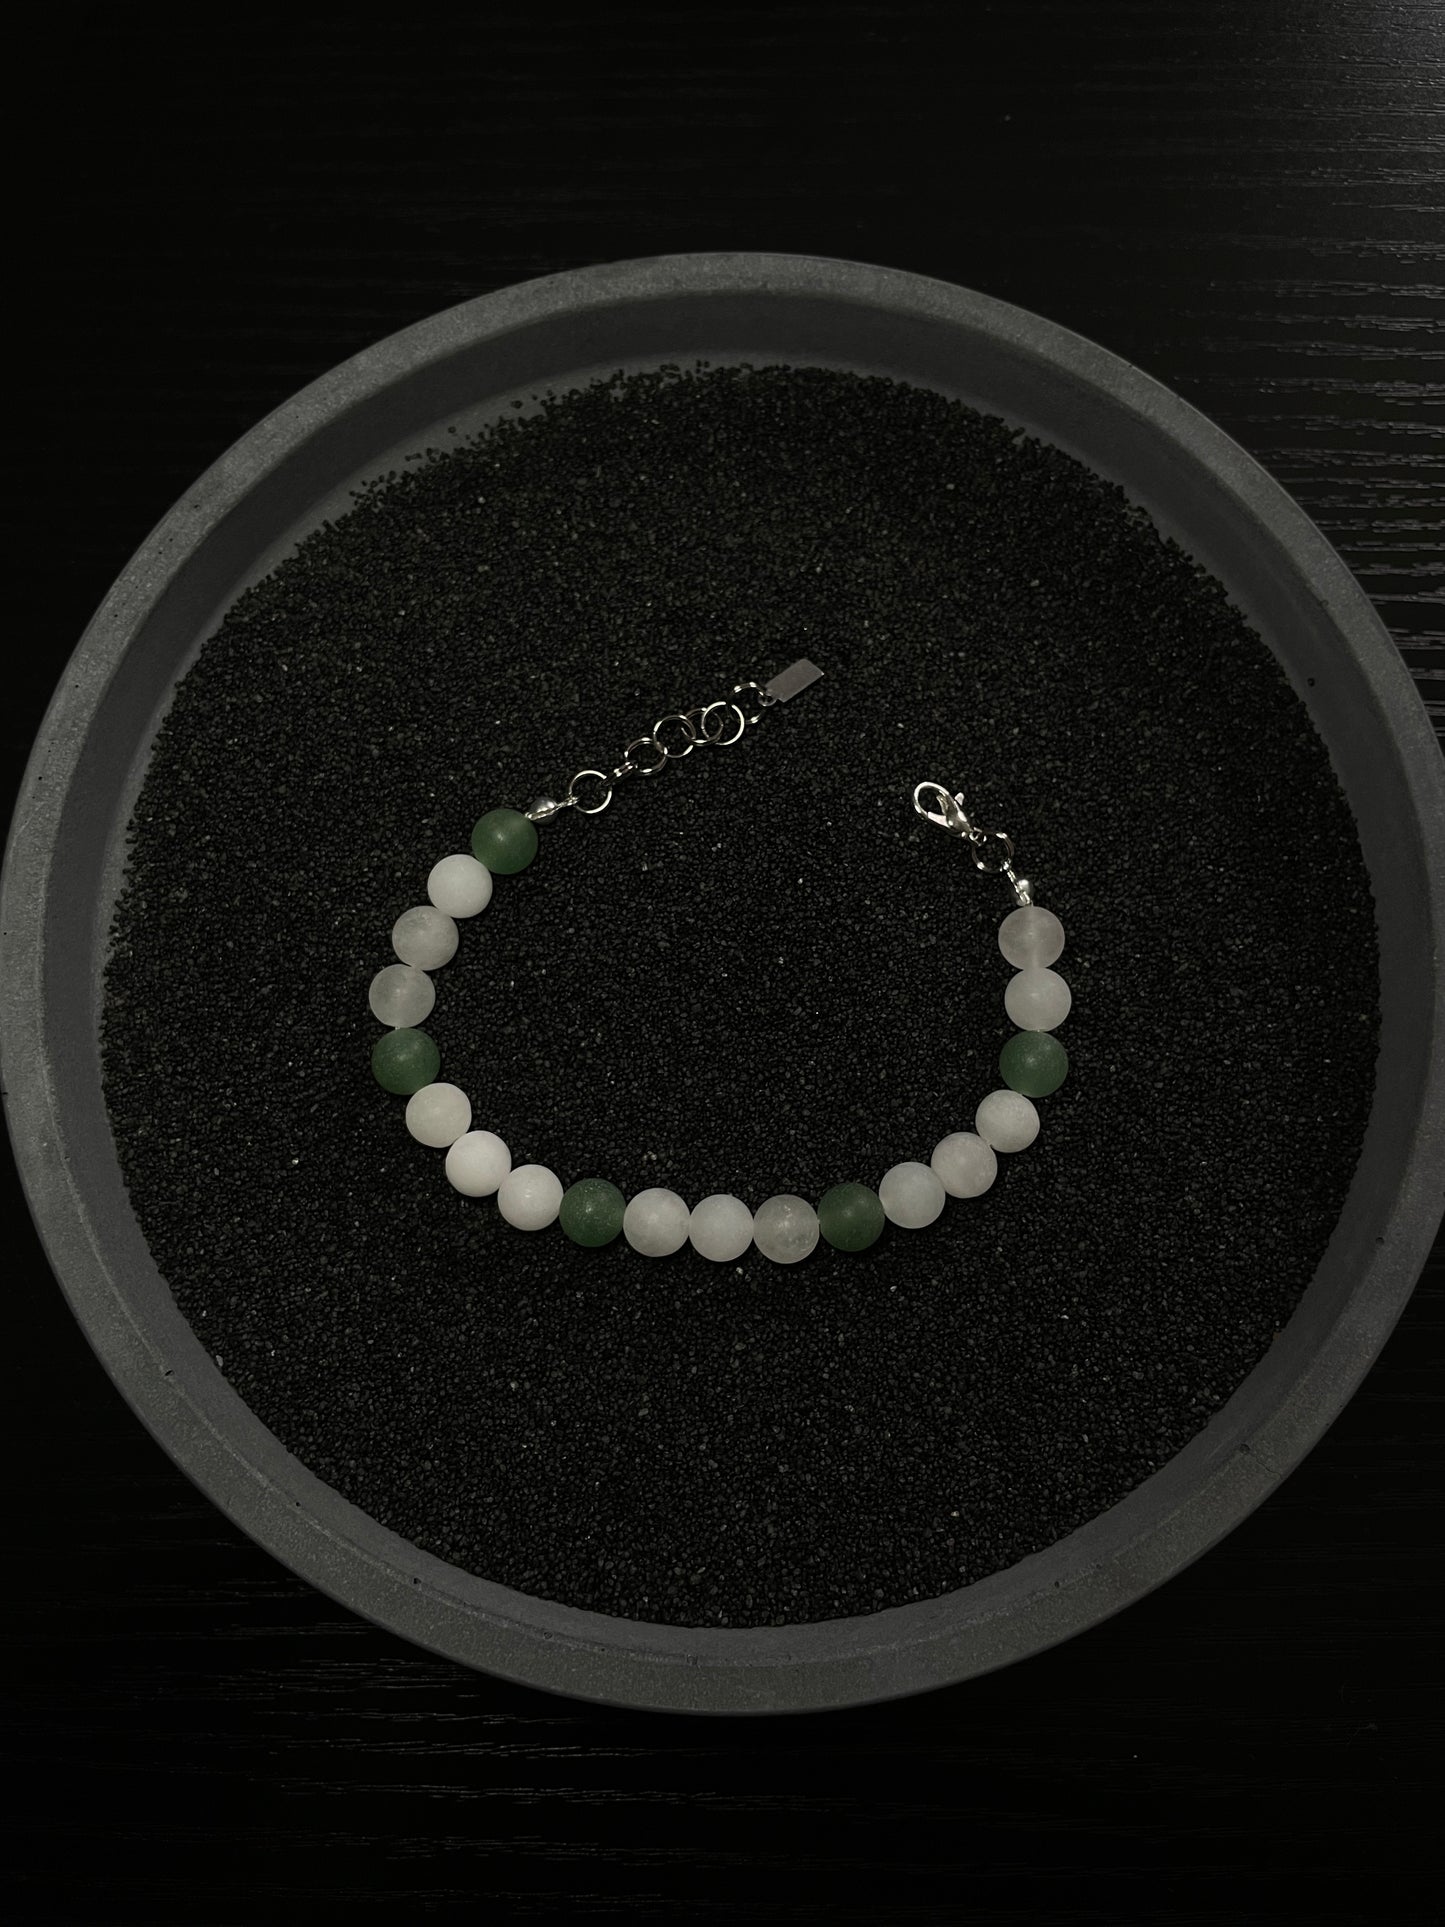 White Frosted with Green Pearls Bracelet